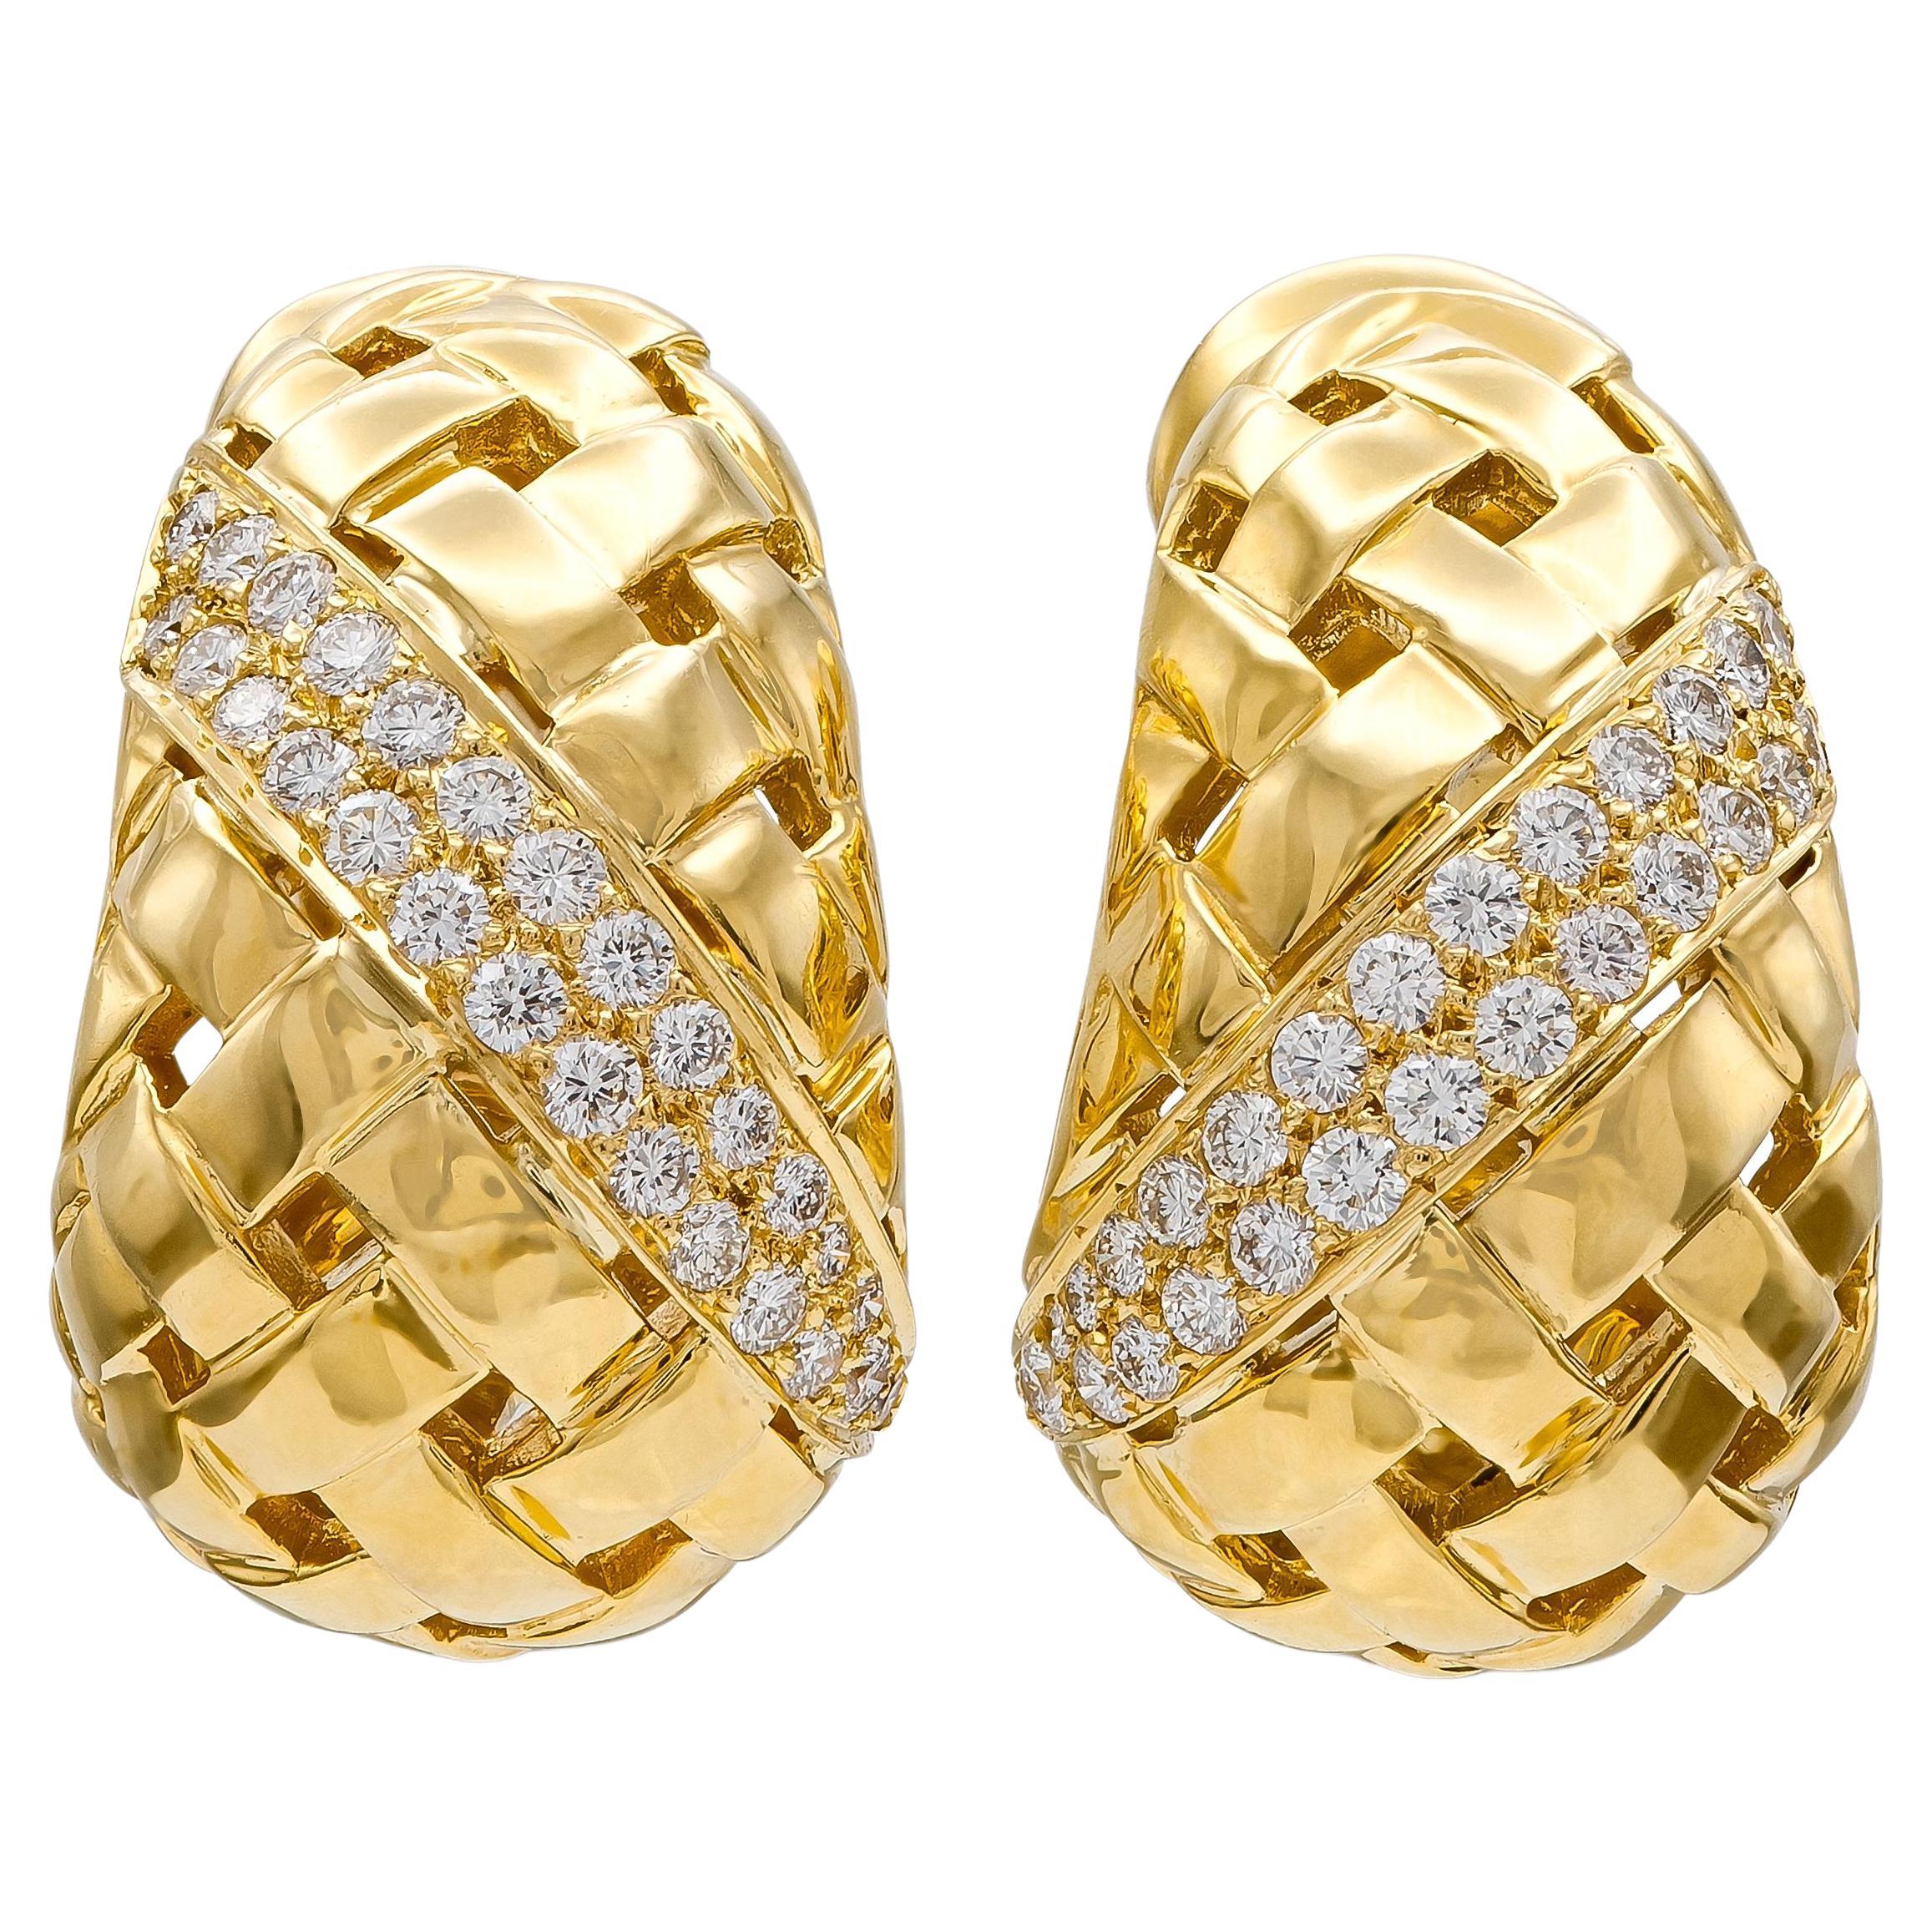 Vintage 1989 Tiffany & Co. Gold Woven Earrings with Diamonds For Sale